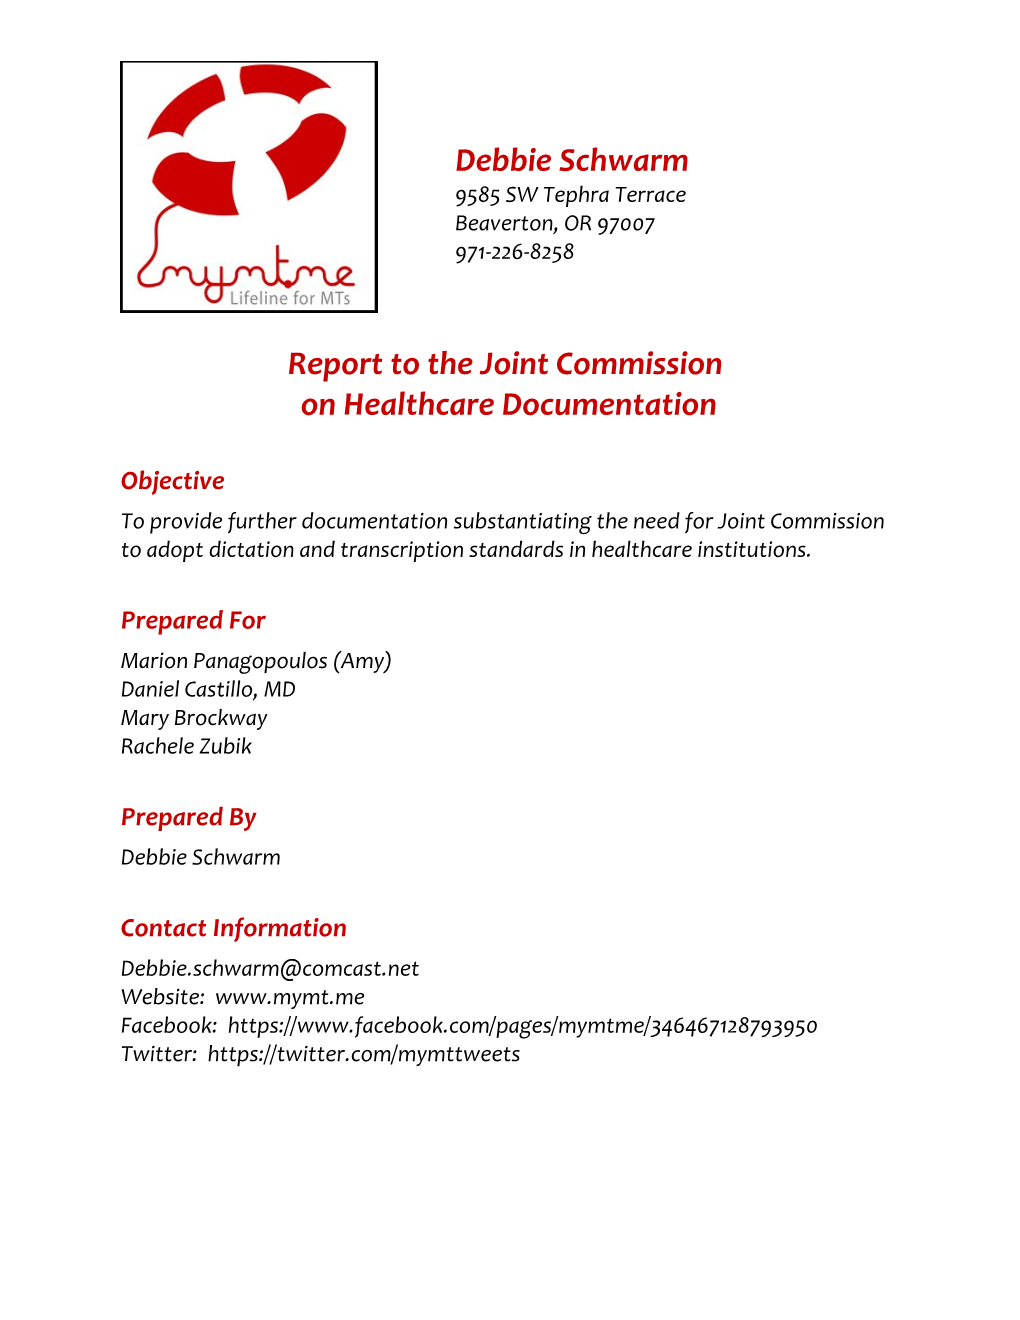 Report to the Joint Commission on Healthcare Documentation